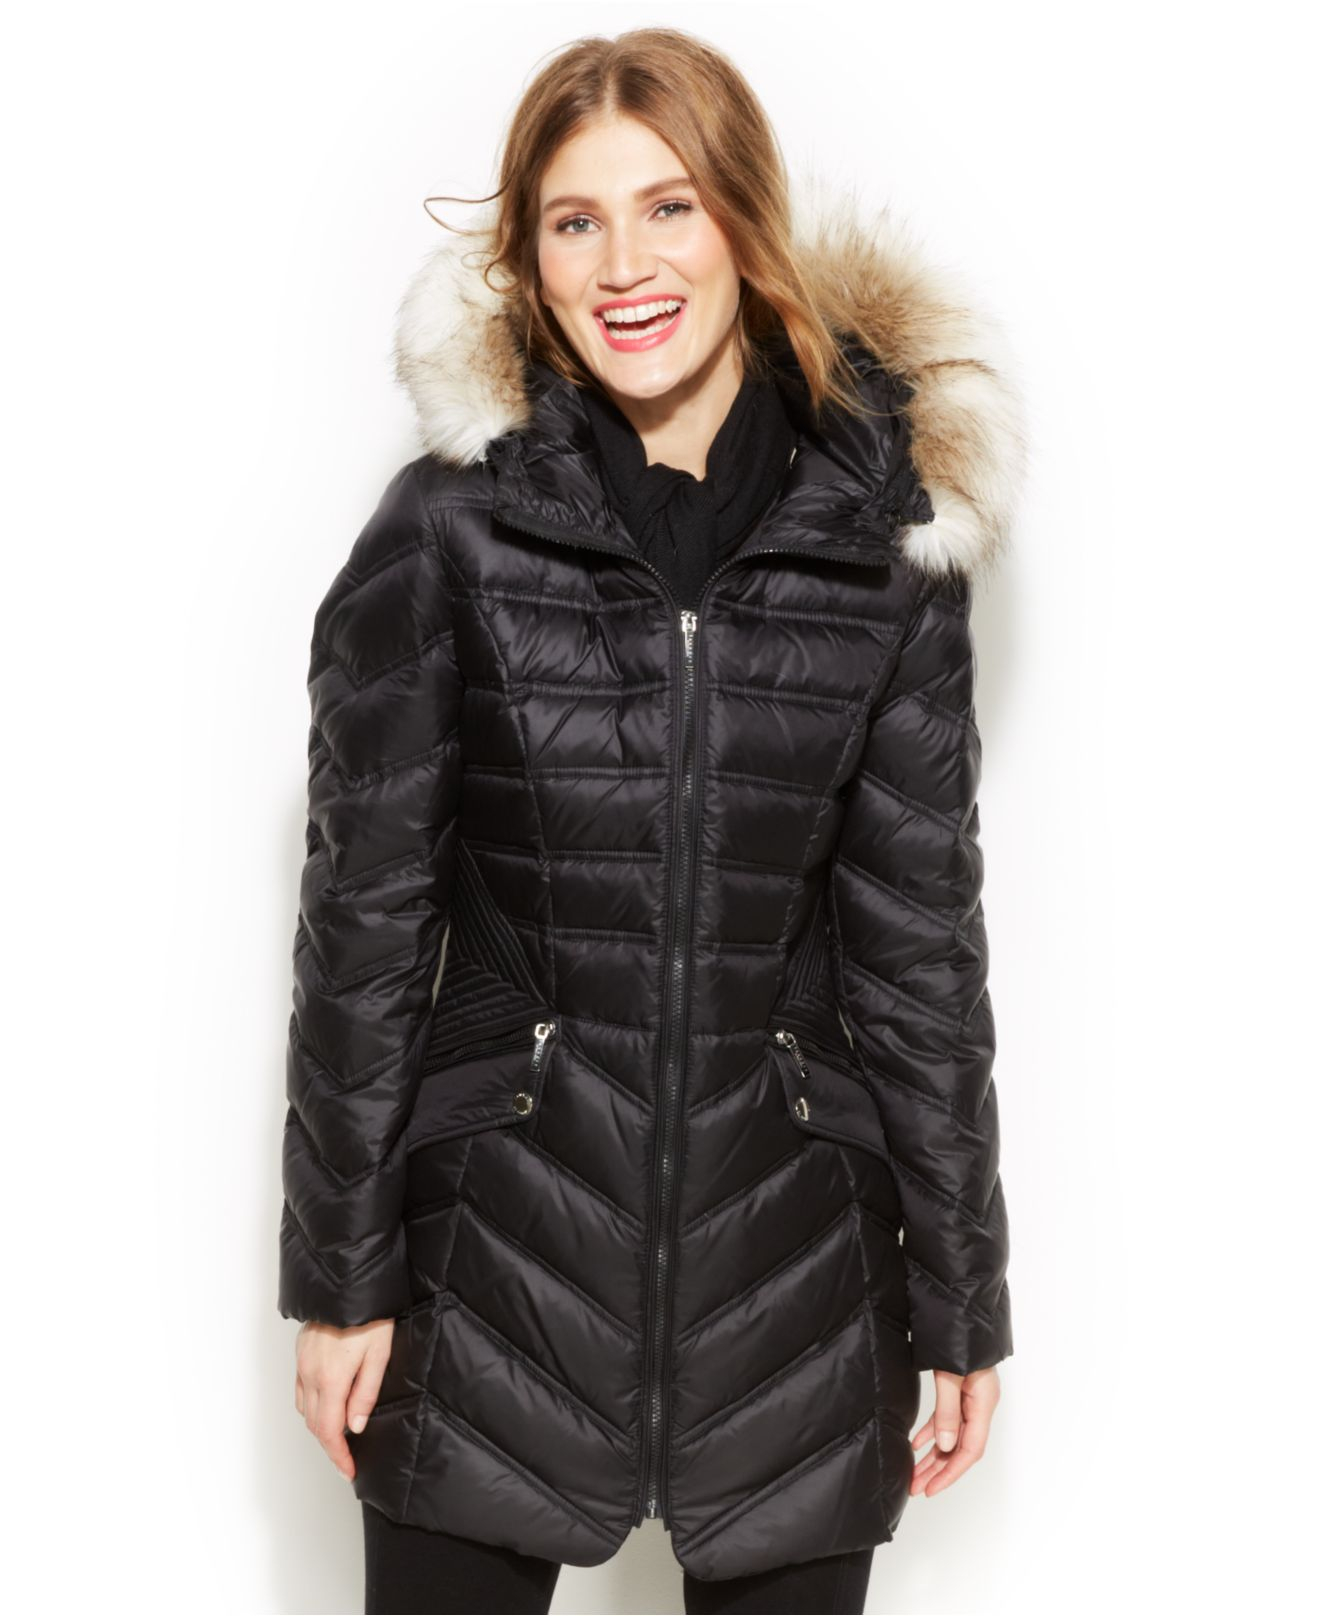 Laundry by shelli segal Faux-Fur-Hooded Quilted Down Puffer Coat in ...